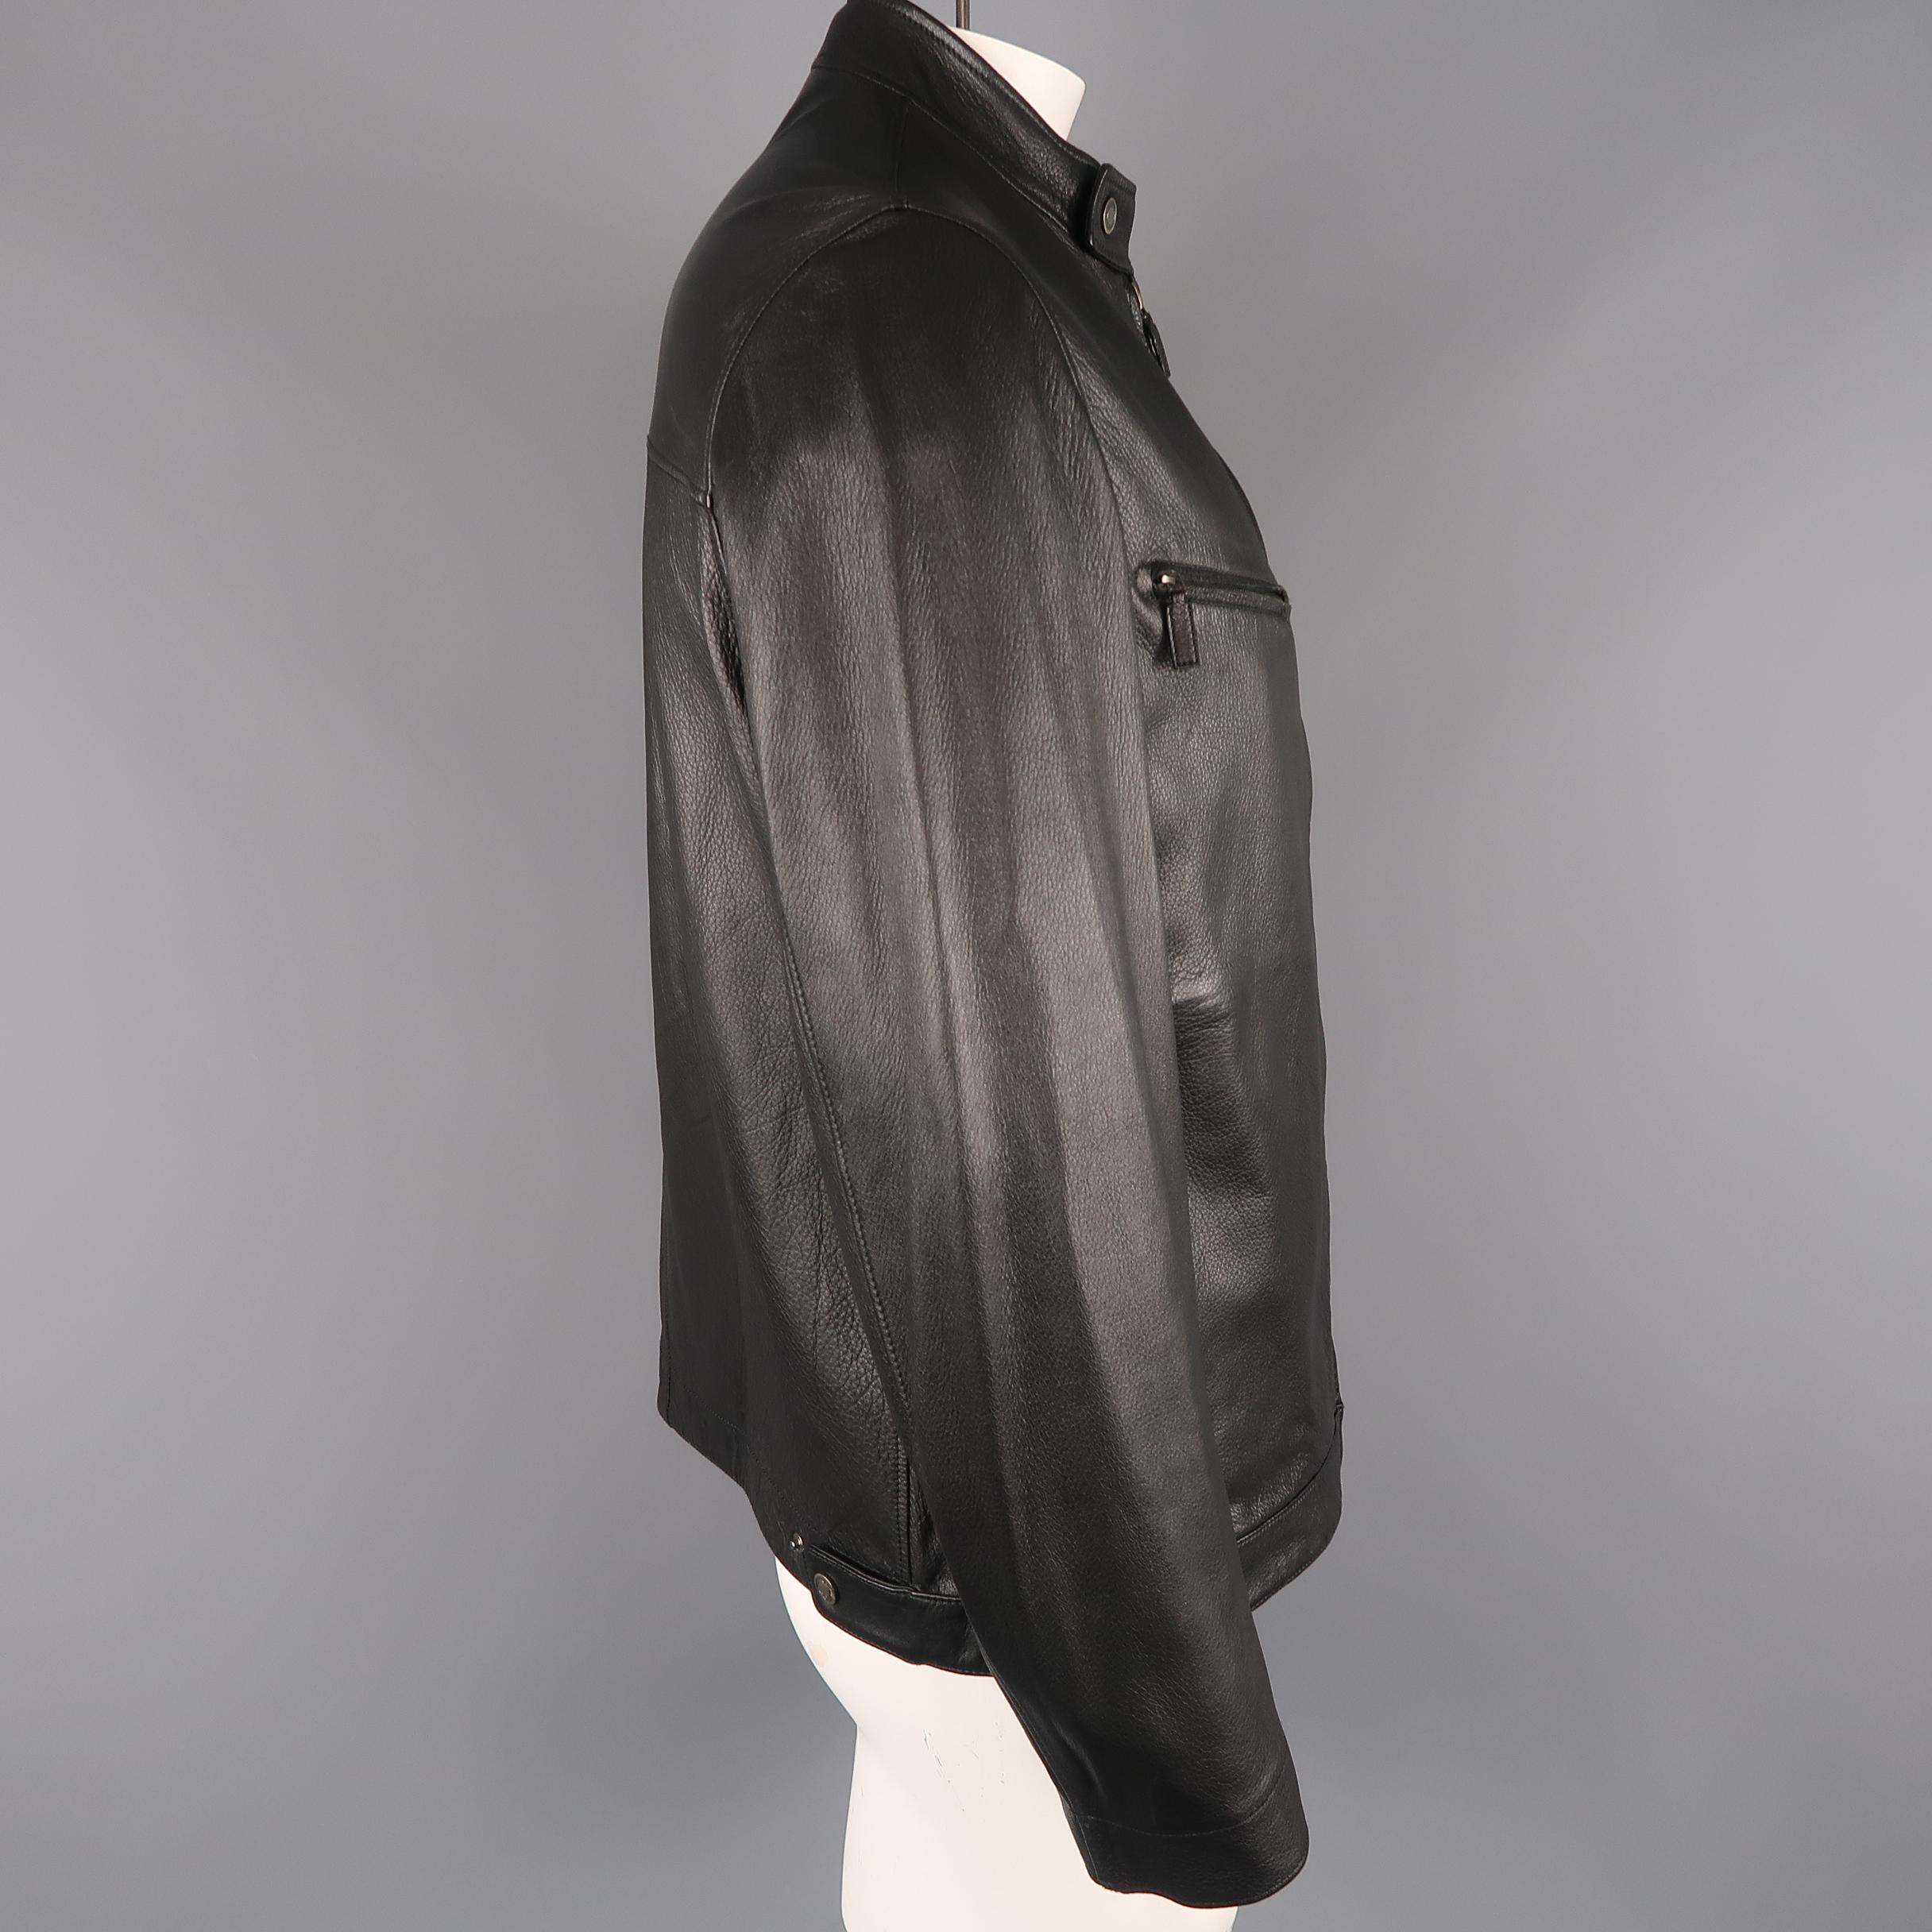 GUCCI 42 Black Textured Leather Zip Up Band Collar Motorcycle Jacket 2